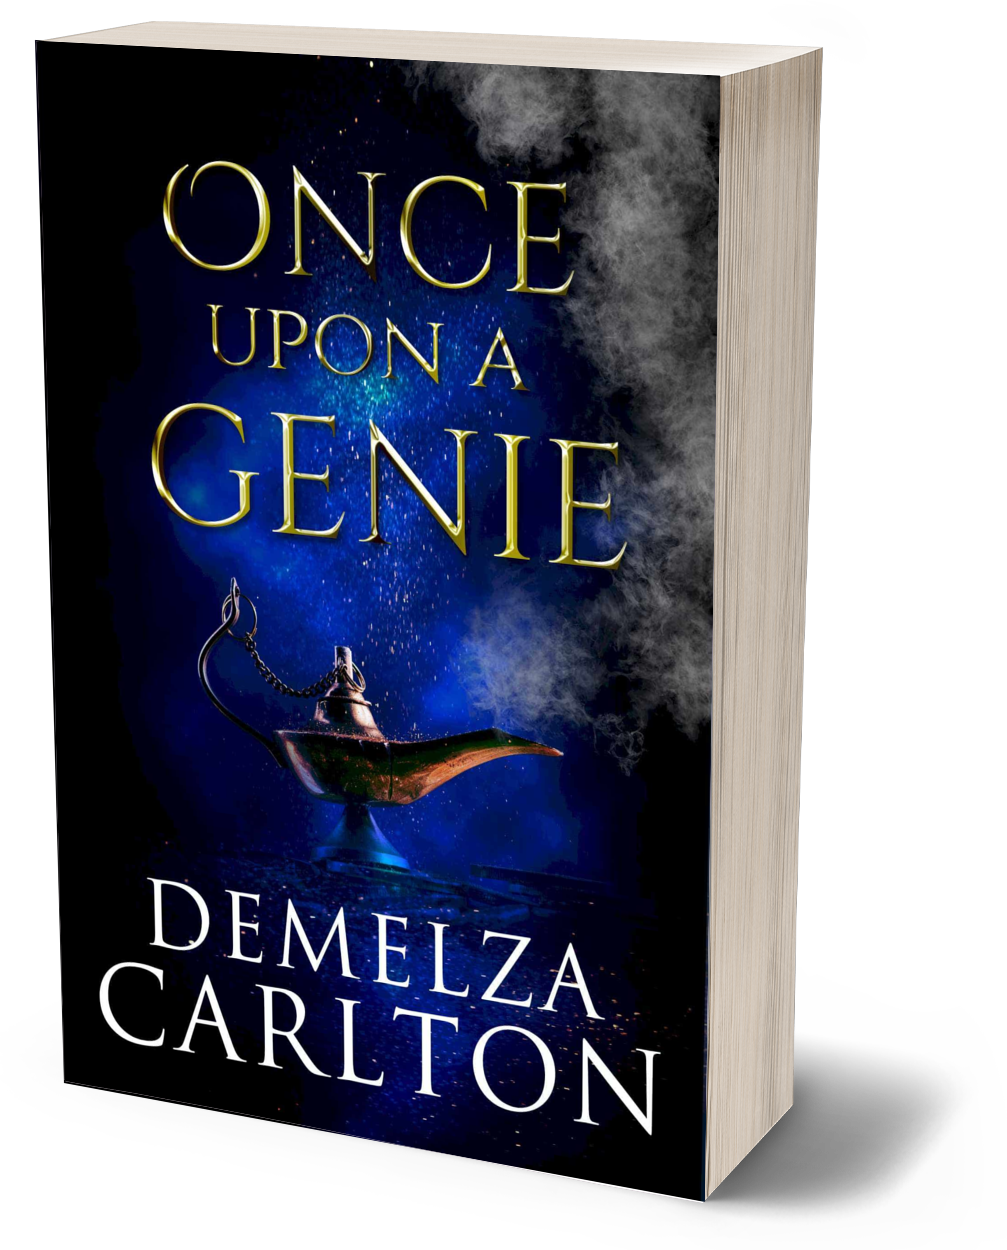 Once Upon a Genie (Book 10-12 in the Romance a Medieval Fairytale series) PAPERBACK